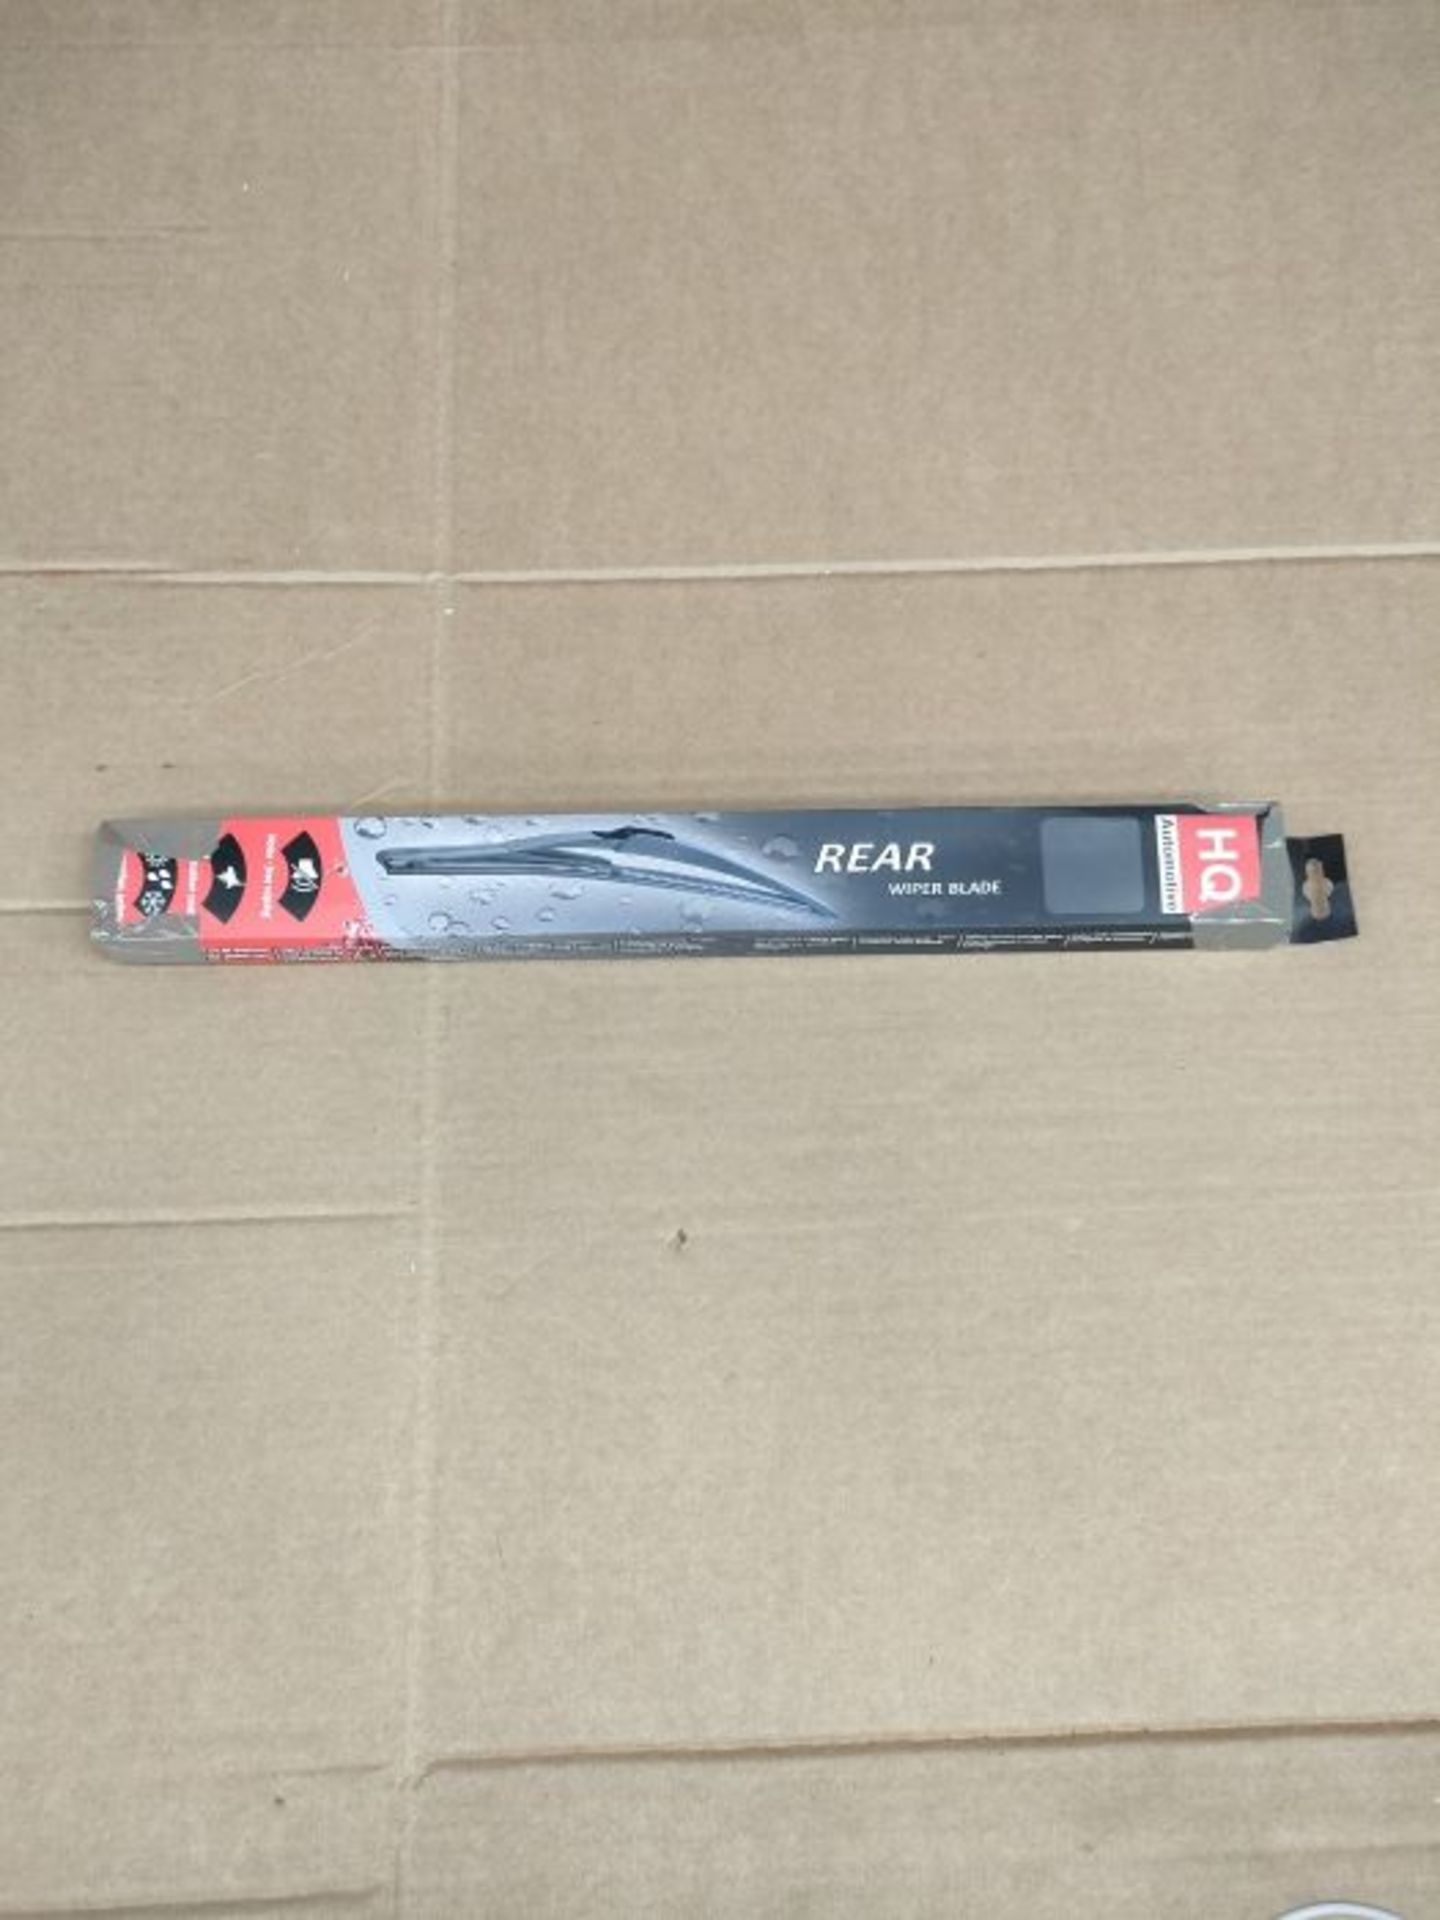 Specified Rear Car Wiper Blade 9" 250mm HQ9A HQ Automotive - Image 2 of 3